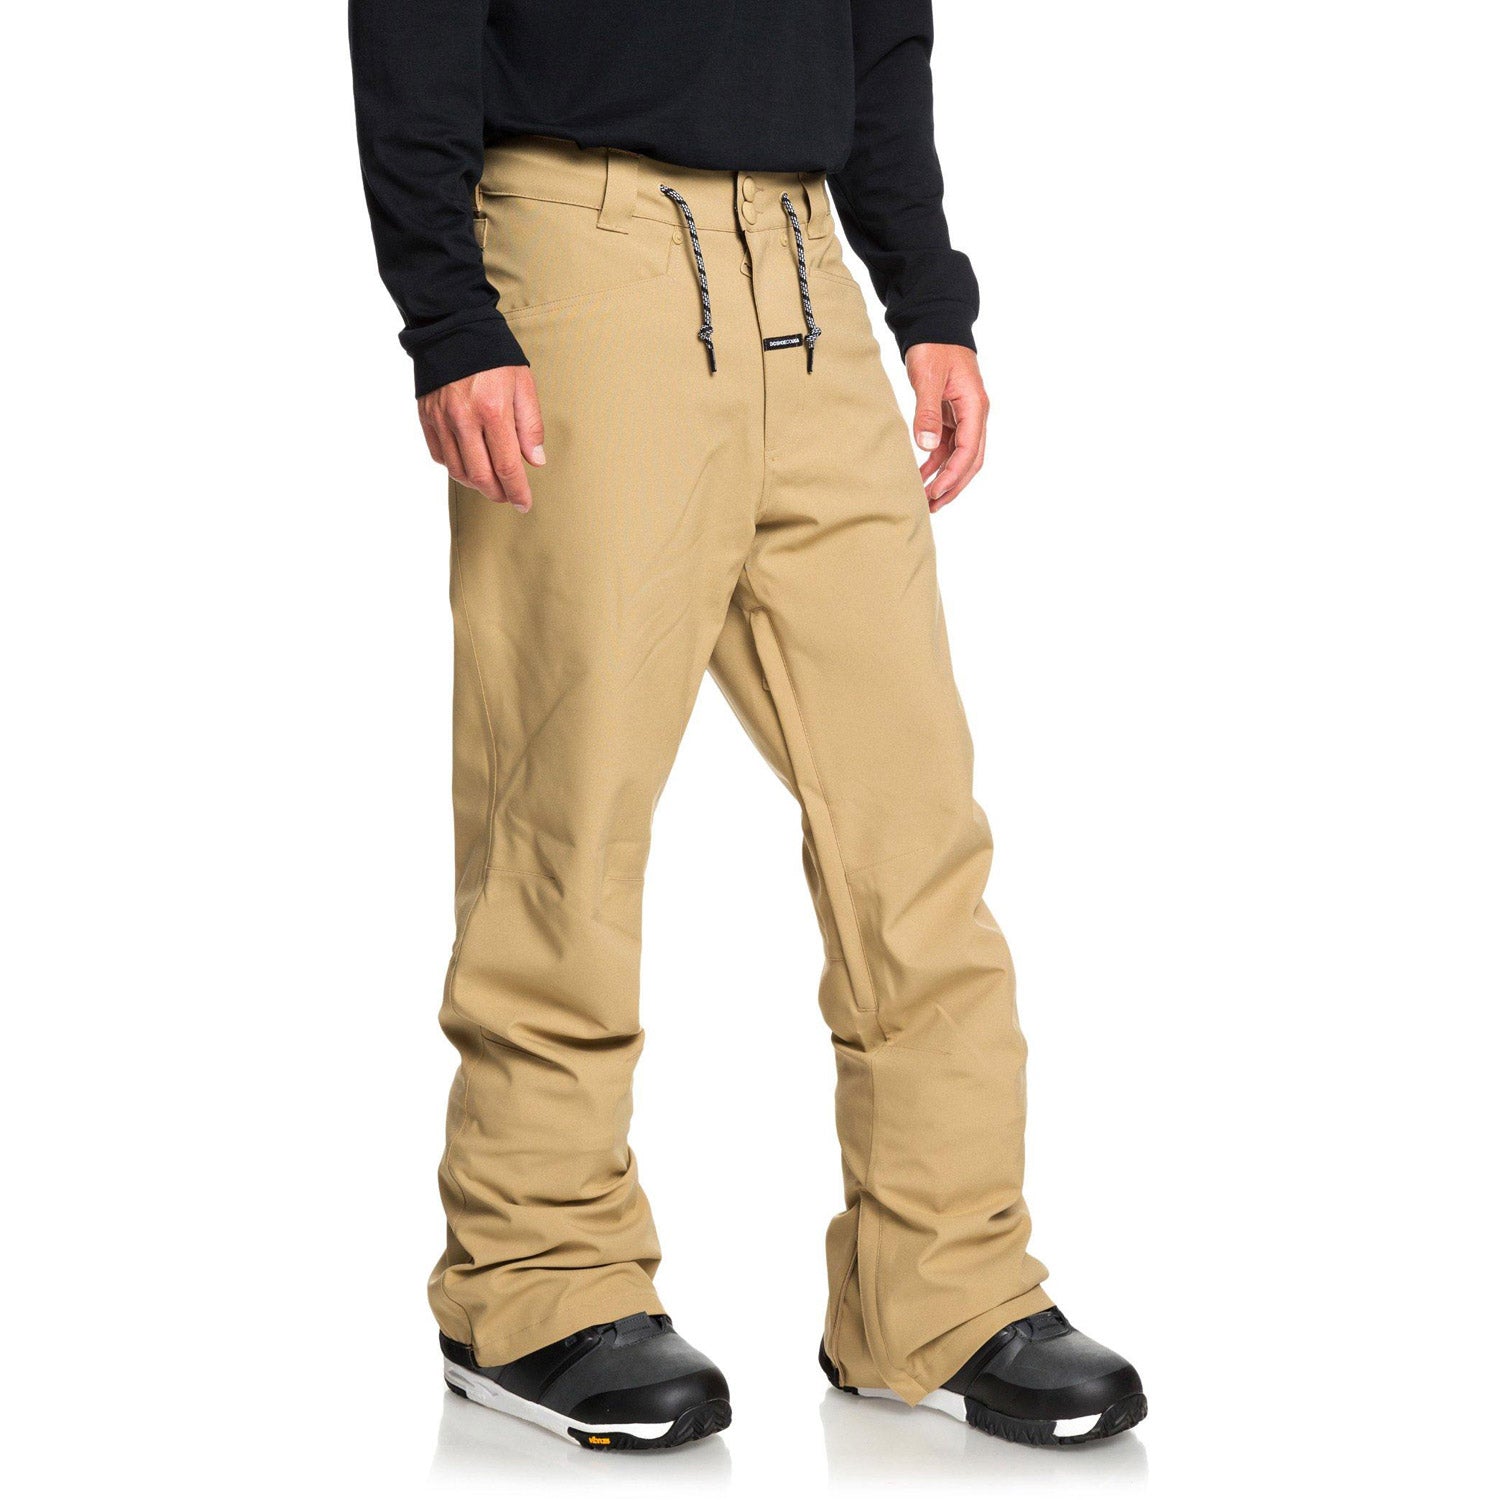 DC Relay Snowboard Pant 2020 - Buy Now 